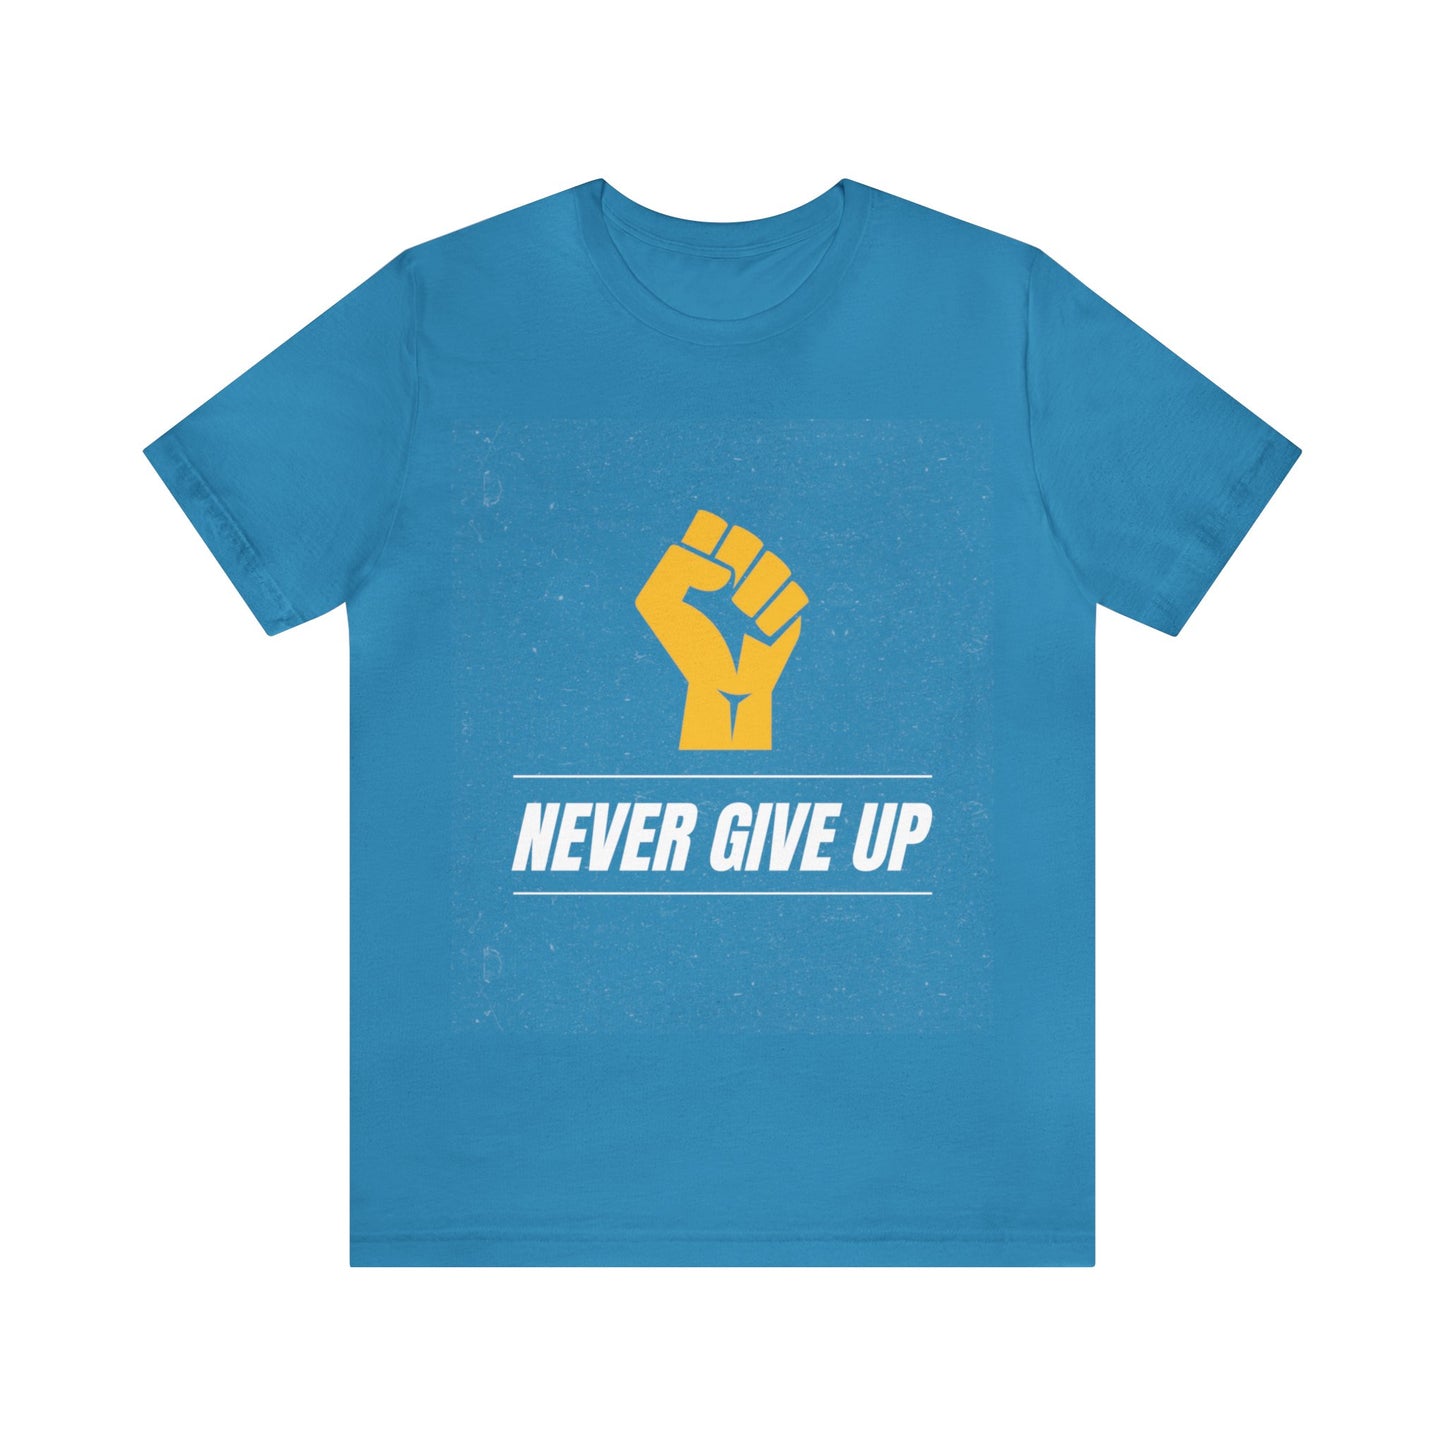 Never Give Up - Motivational, Inspirational T Shirt for Men and Women